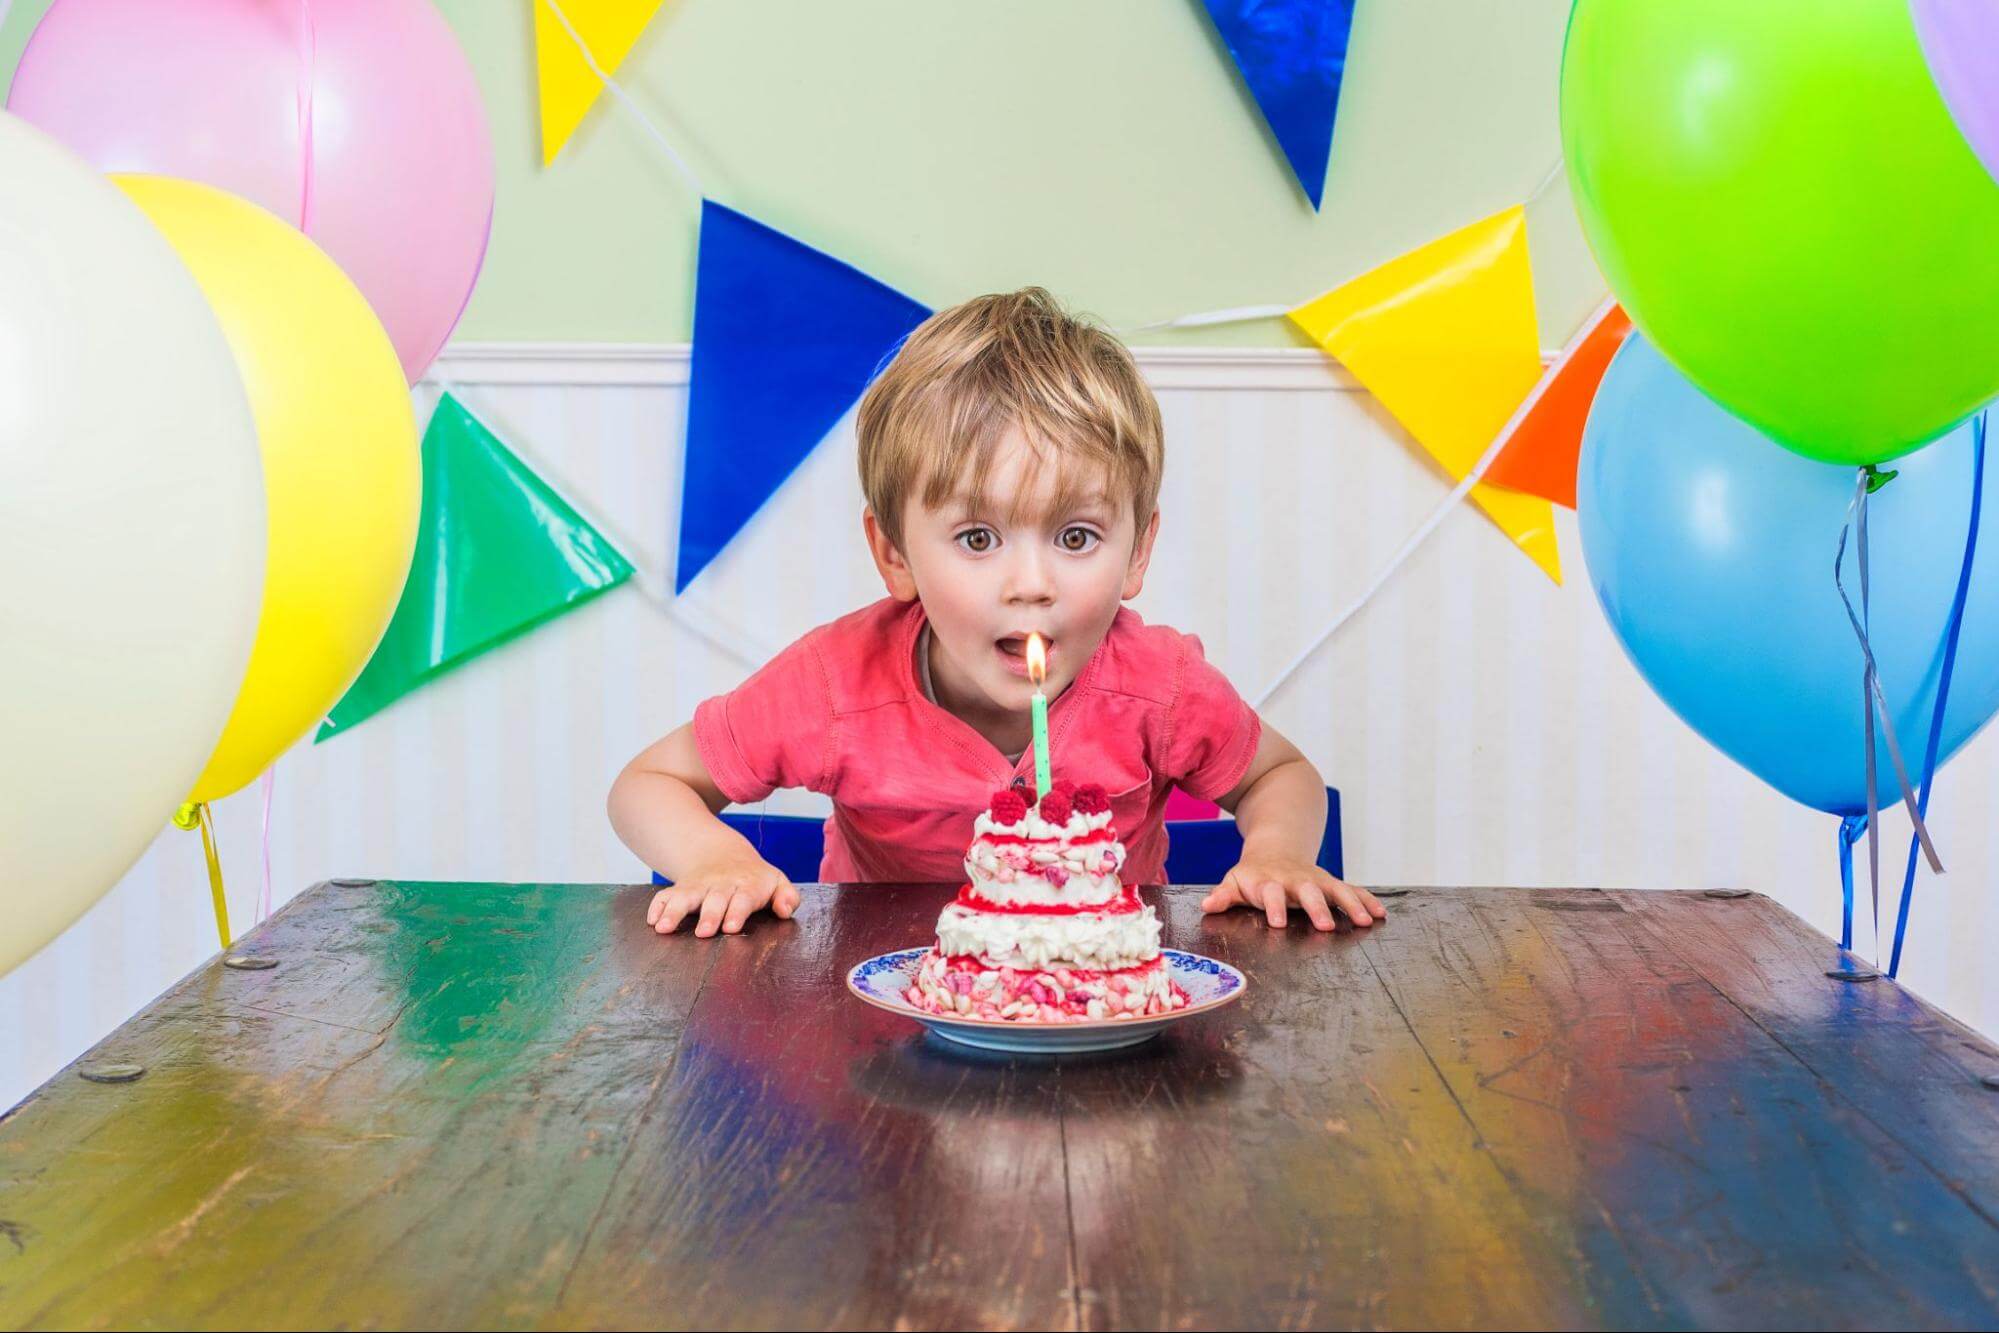 Baby Cake coin is the latest crypto to surge in price ...